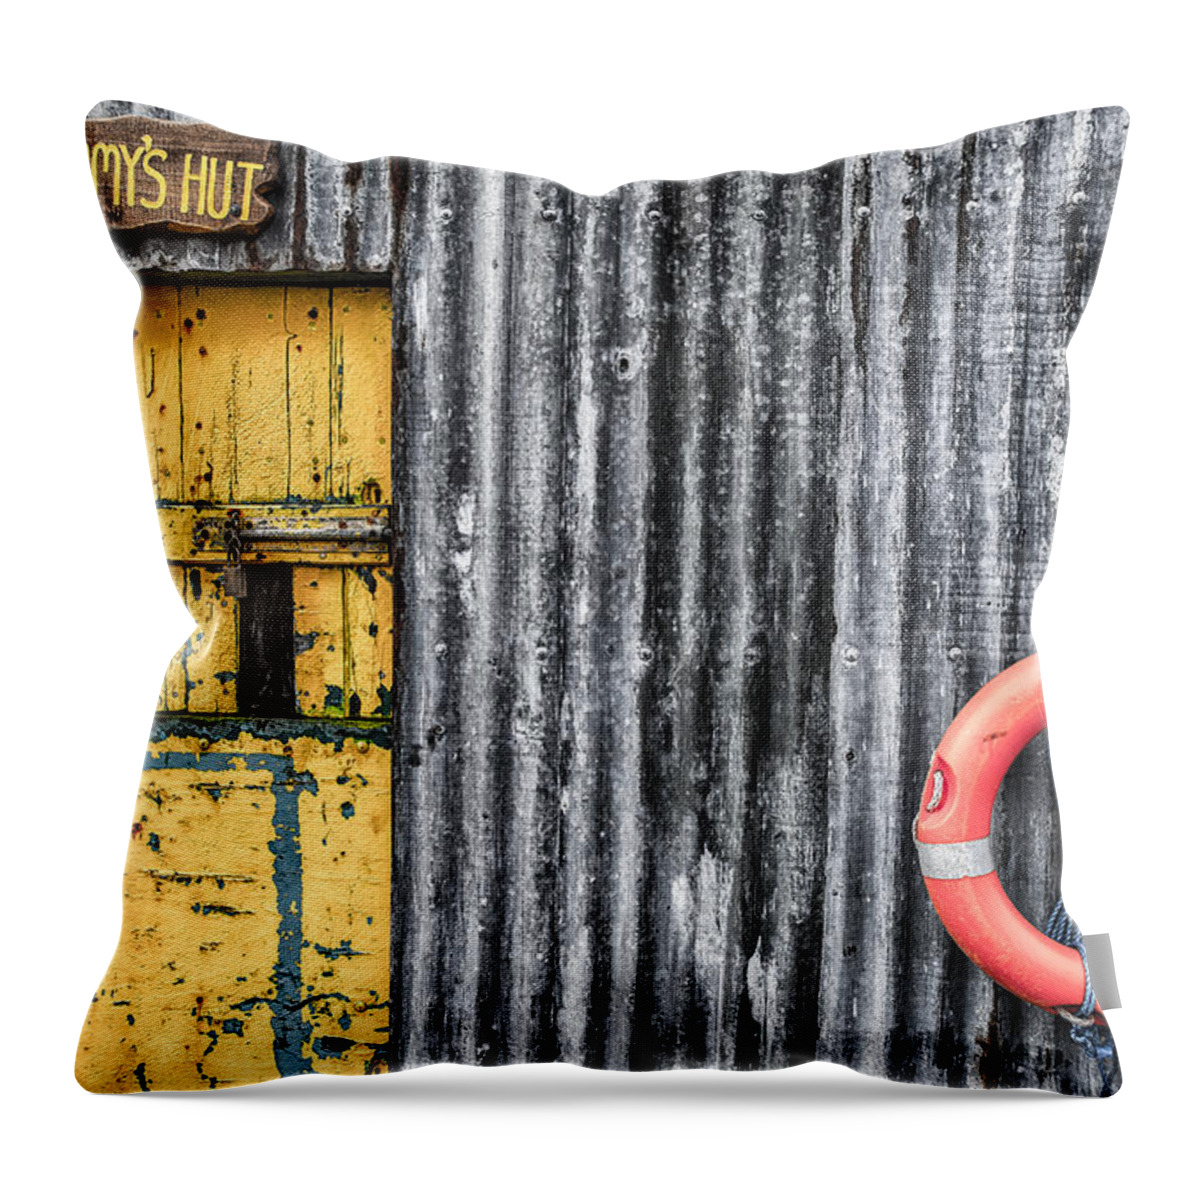 Dunseverick Throw Pillow featuring the photograph Sammy's Hut by Nigel R Bell